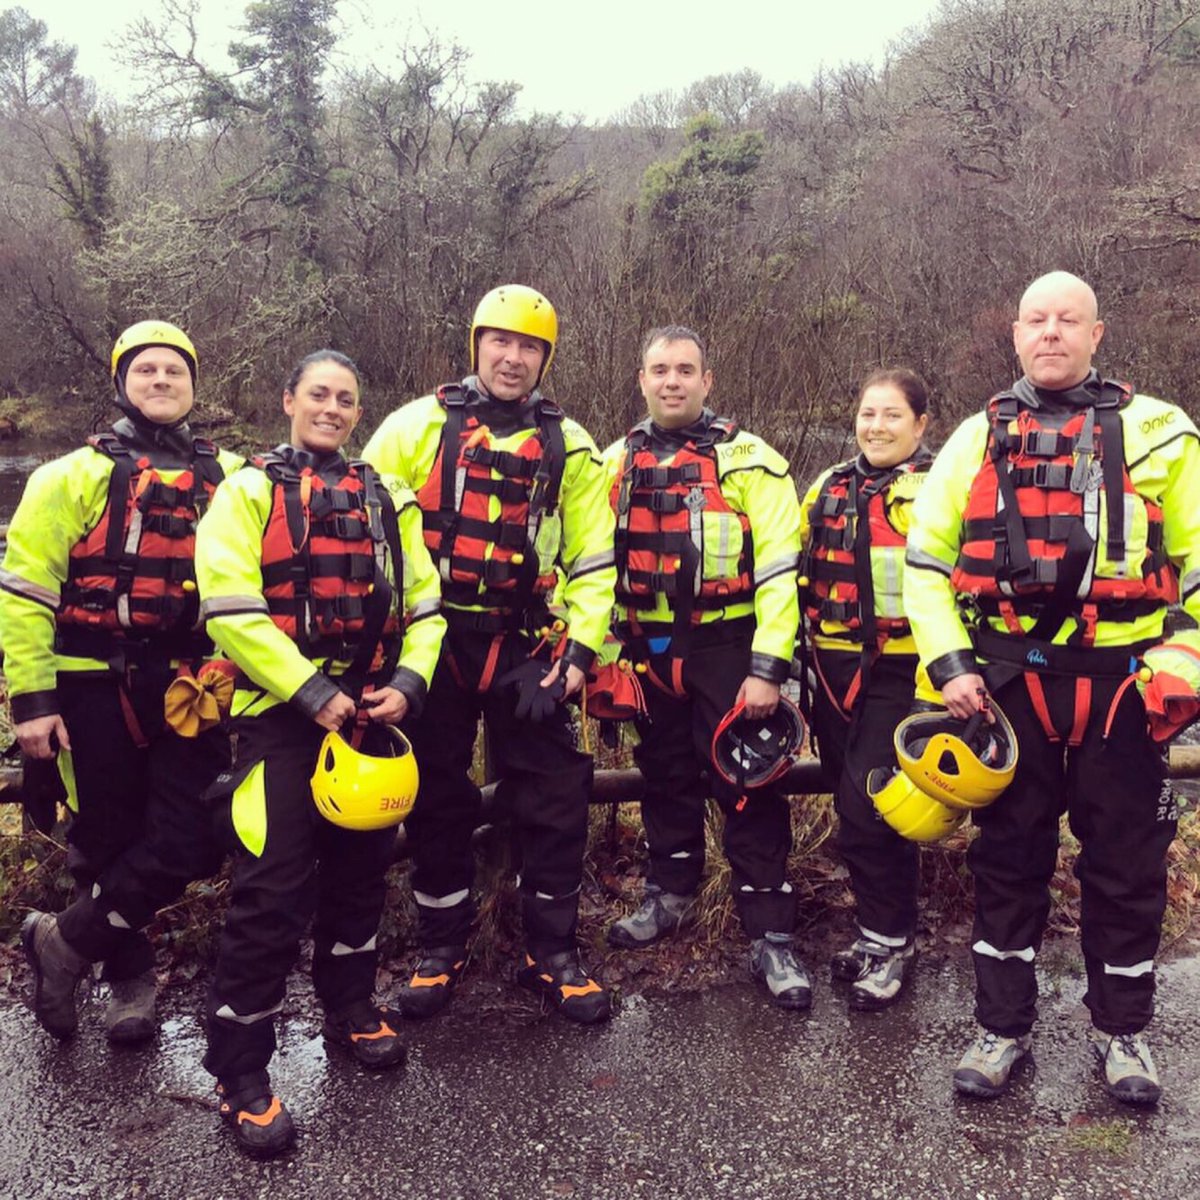 White Watch Lymm completed their Swift Water Validation Day at Betws-y-Coed yesterday! 🏊🏼‍♀️🏊🏽‍♂️🚒
#practiseforreal #dontdrinkanddrown #watersaftey 
#notjustfire #staysafe